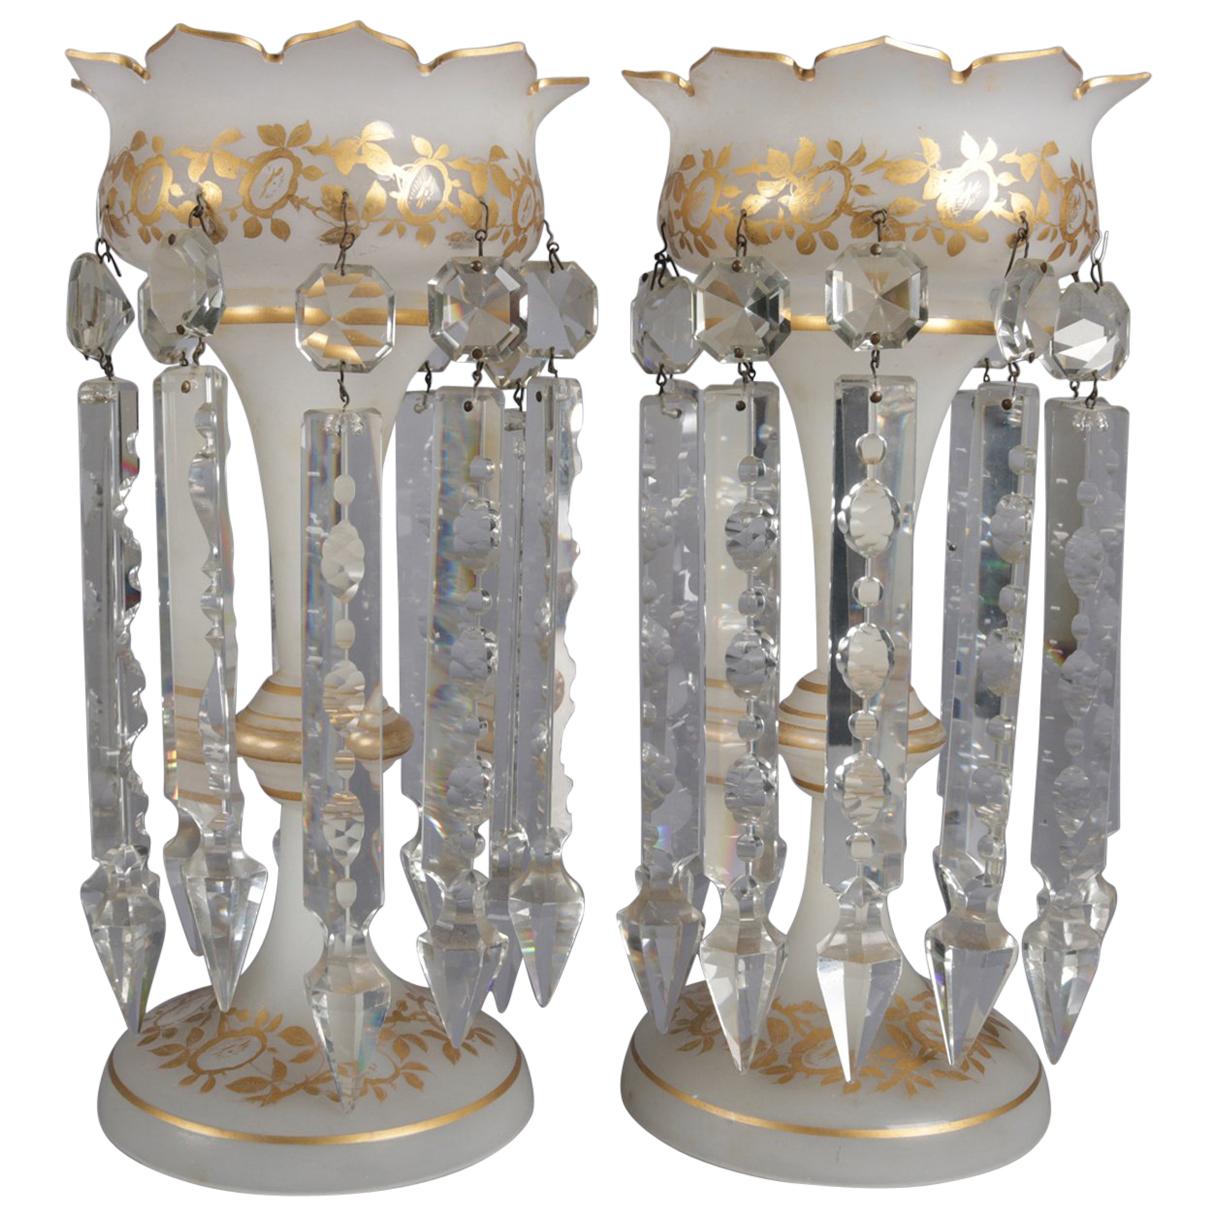 Pair of Victorian Gilt Frosted Glass and Cut Crystal Mantel Lustres with Prisms